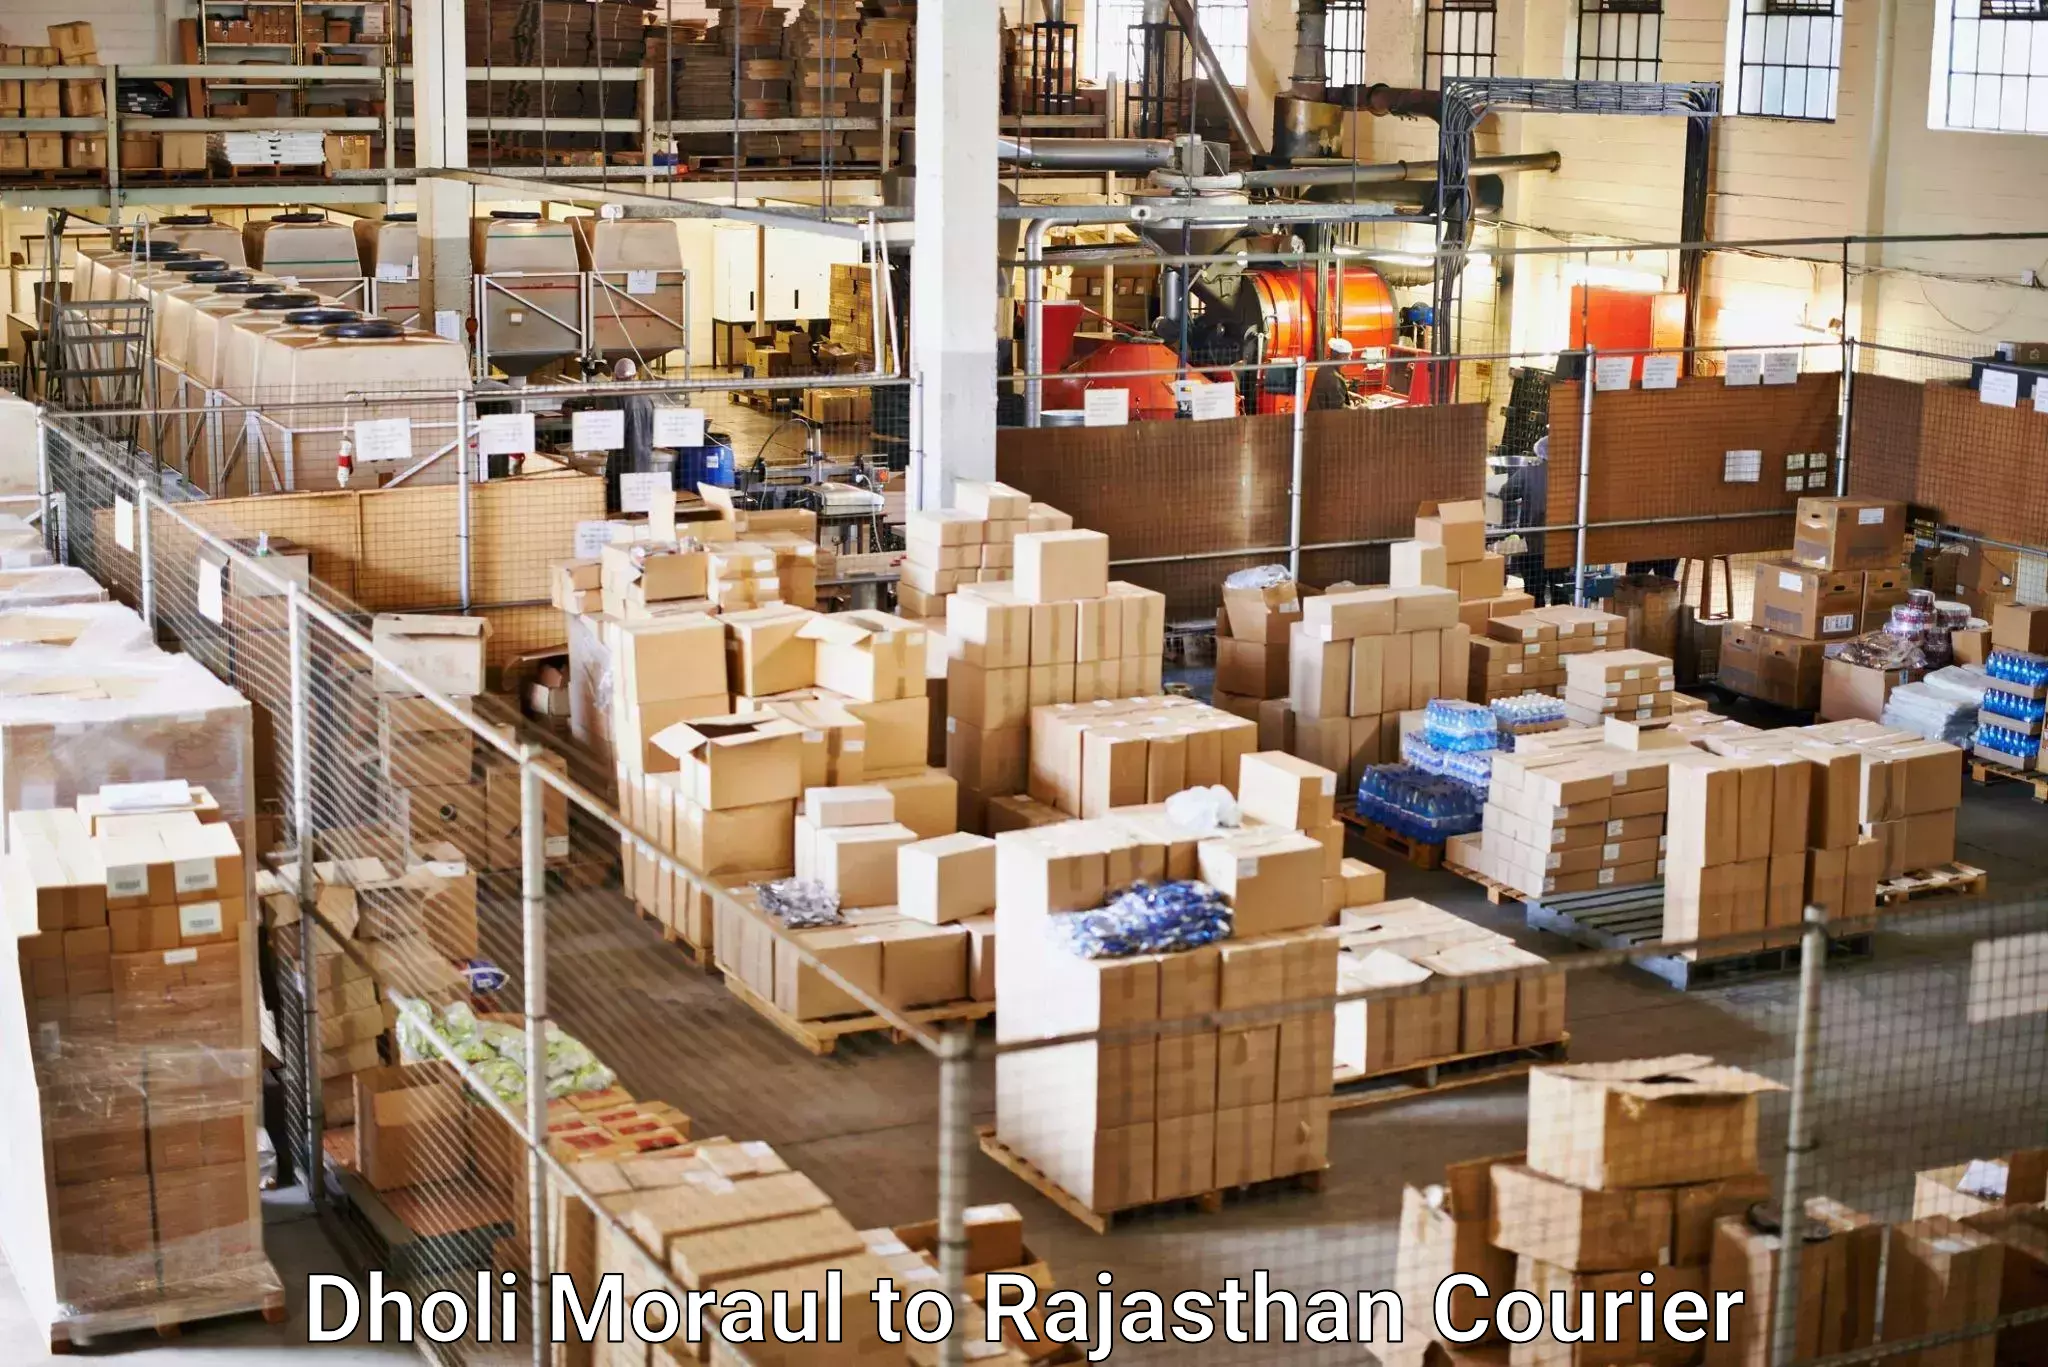 Holiday shipping services Dholi Moraul to Sultana